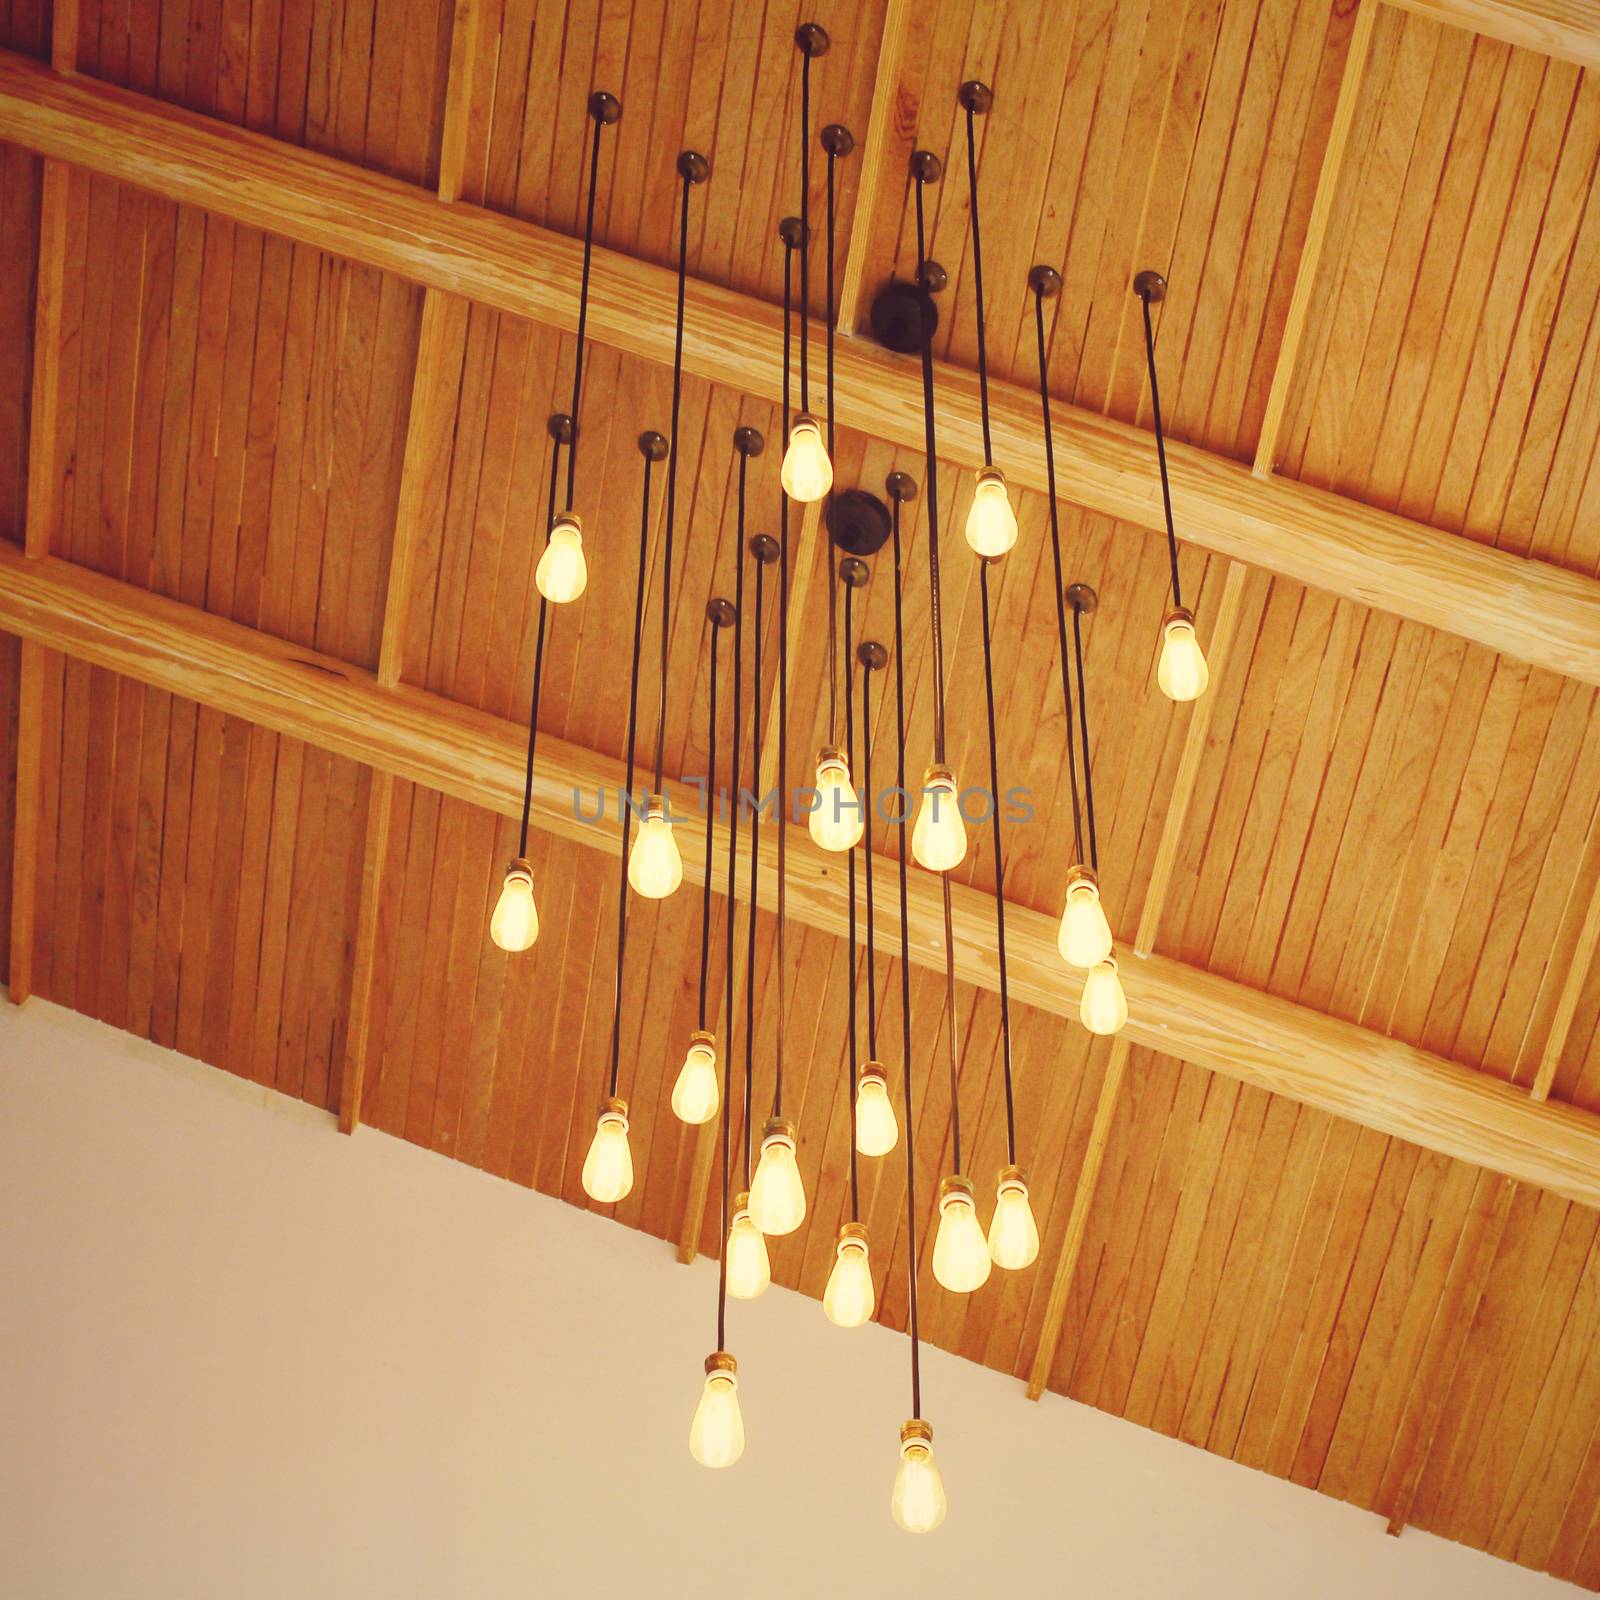 Vintage lighting decor hanging from ceiling with retro filter effect 